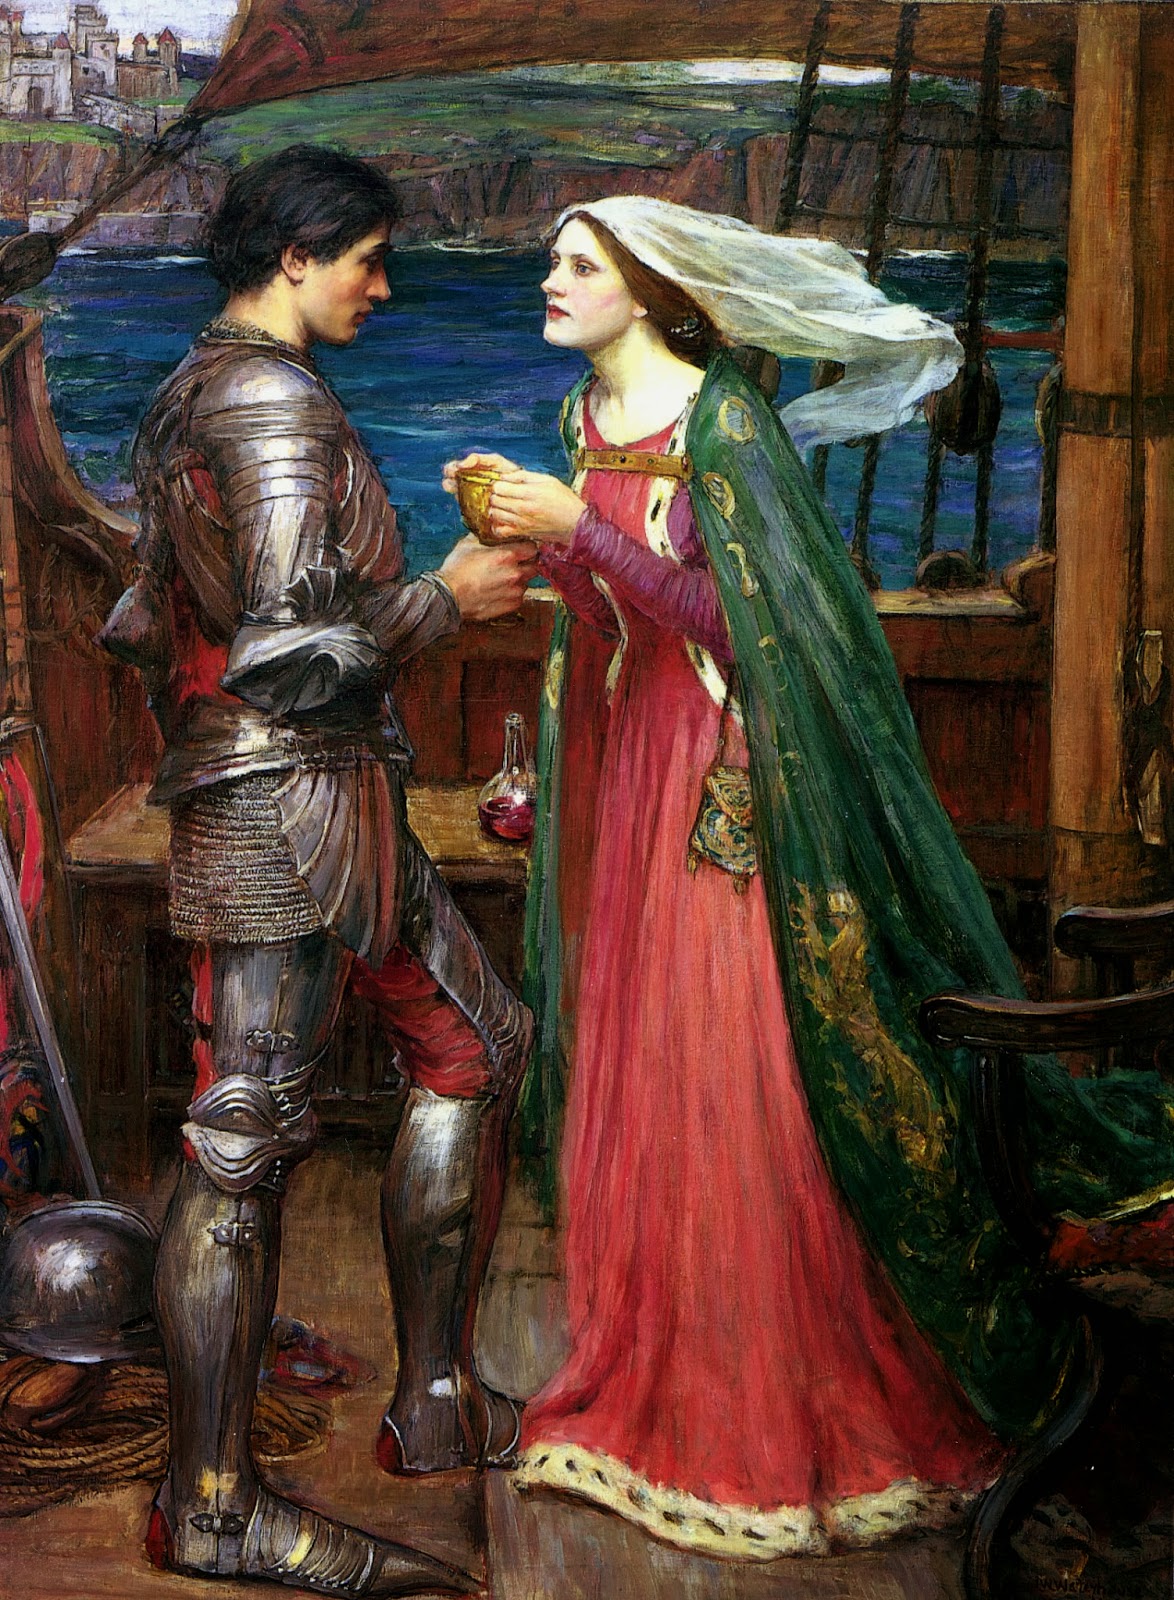 John William waterhouse tristan and isolde with the potion